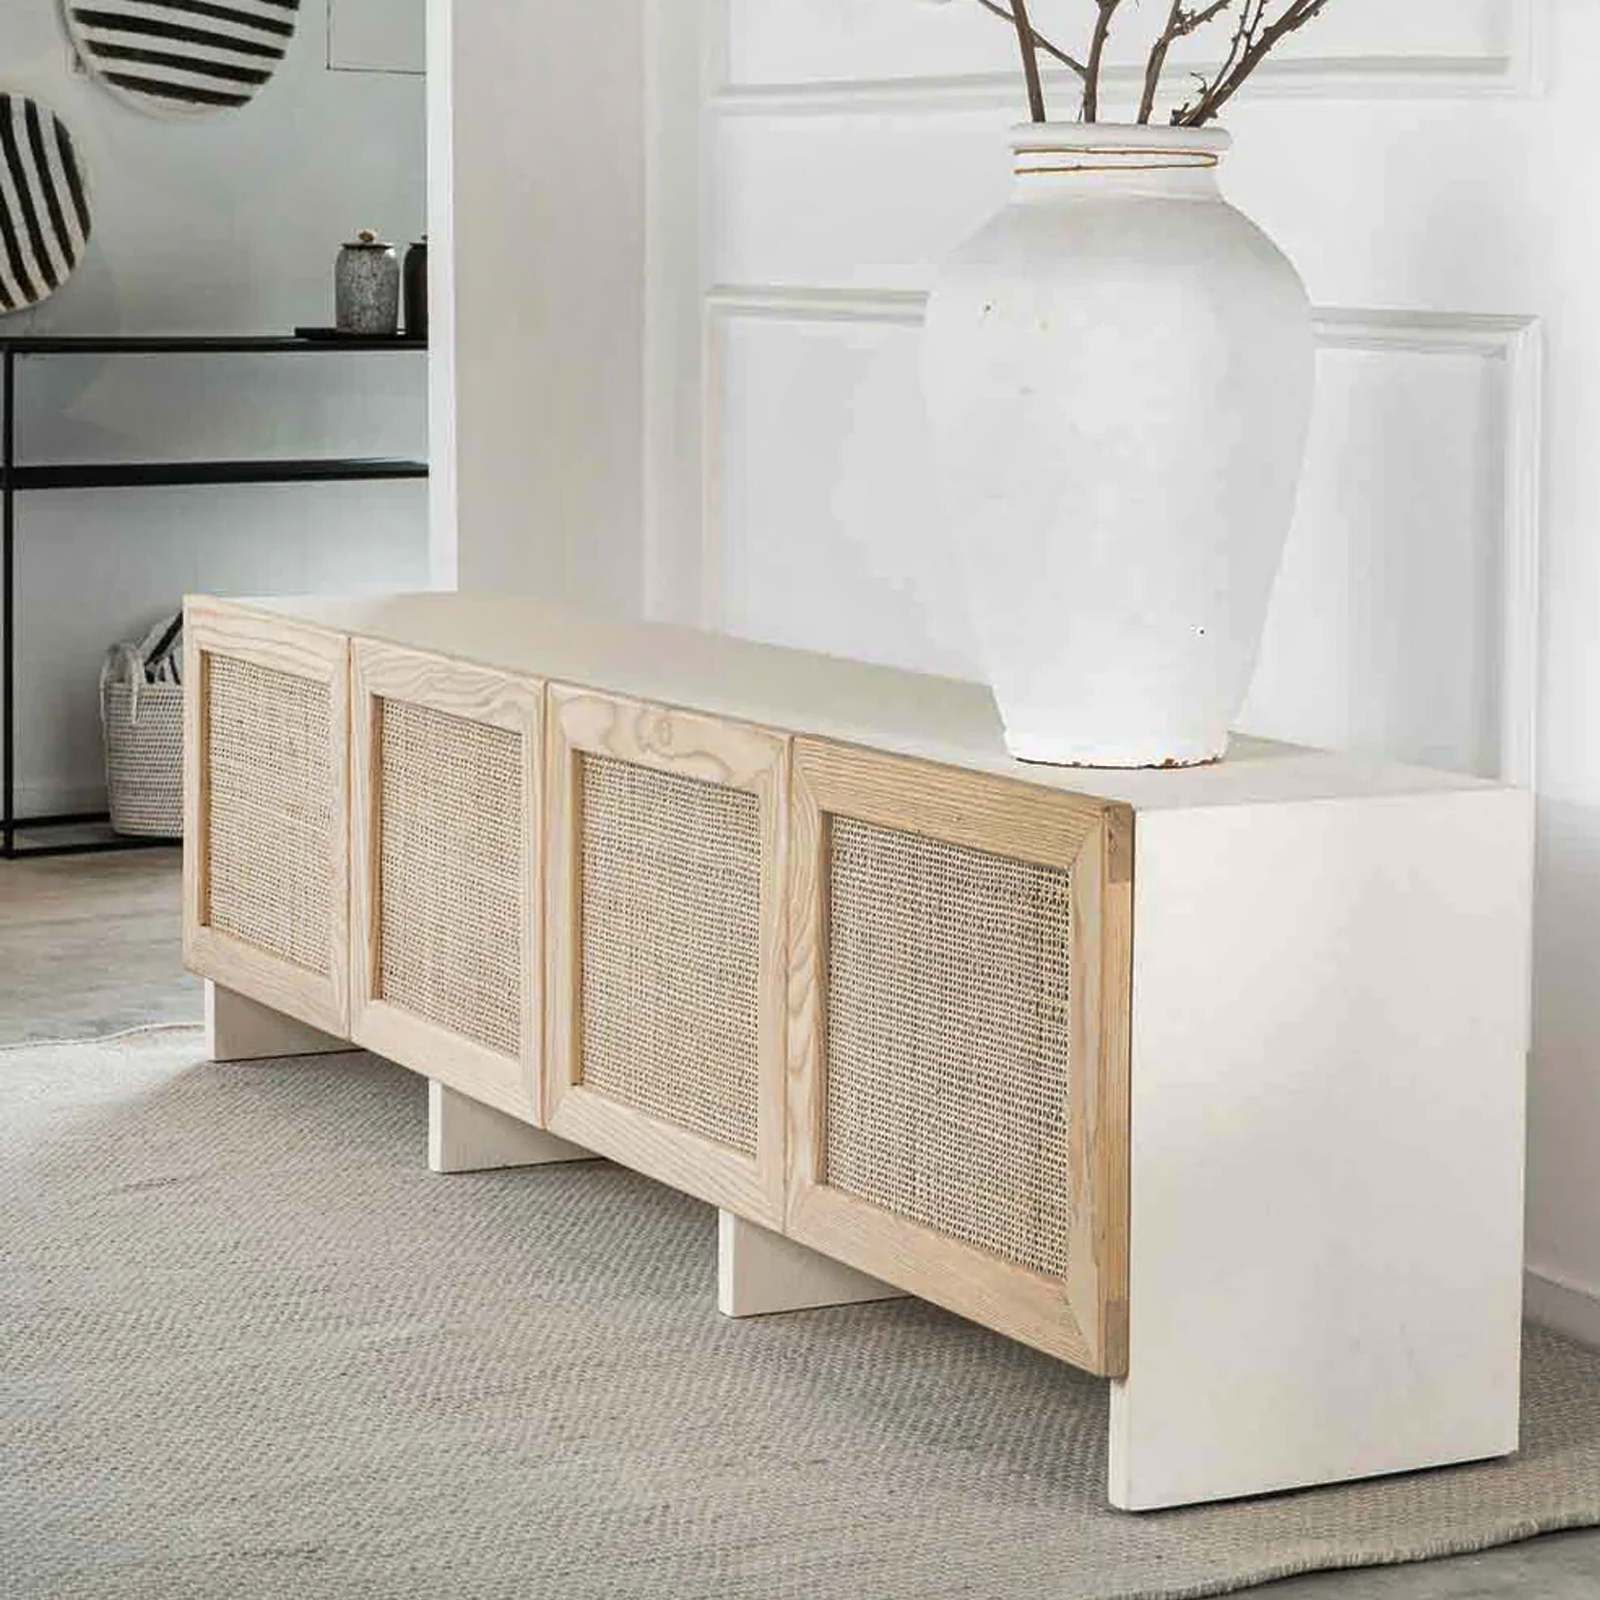 Dallas Tv Unit - Wood and Steel Furnitures